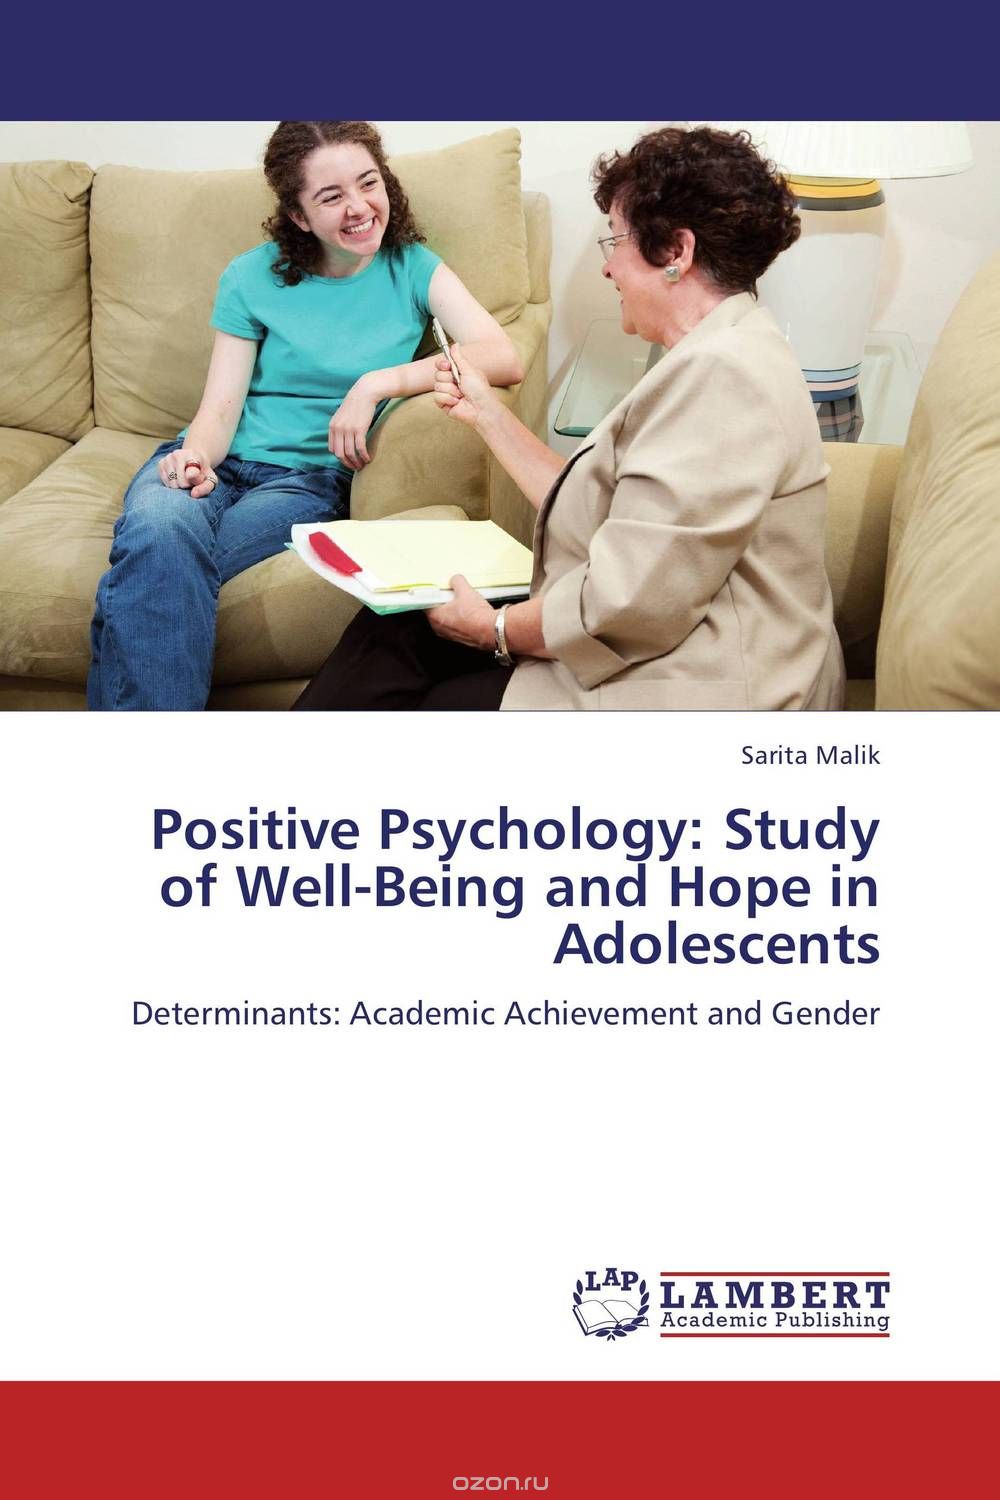 Скачать книгу "Positive Psychology: Study of Well-Being and Hope in Adolescents"